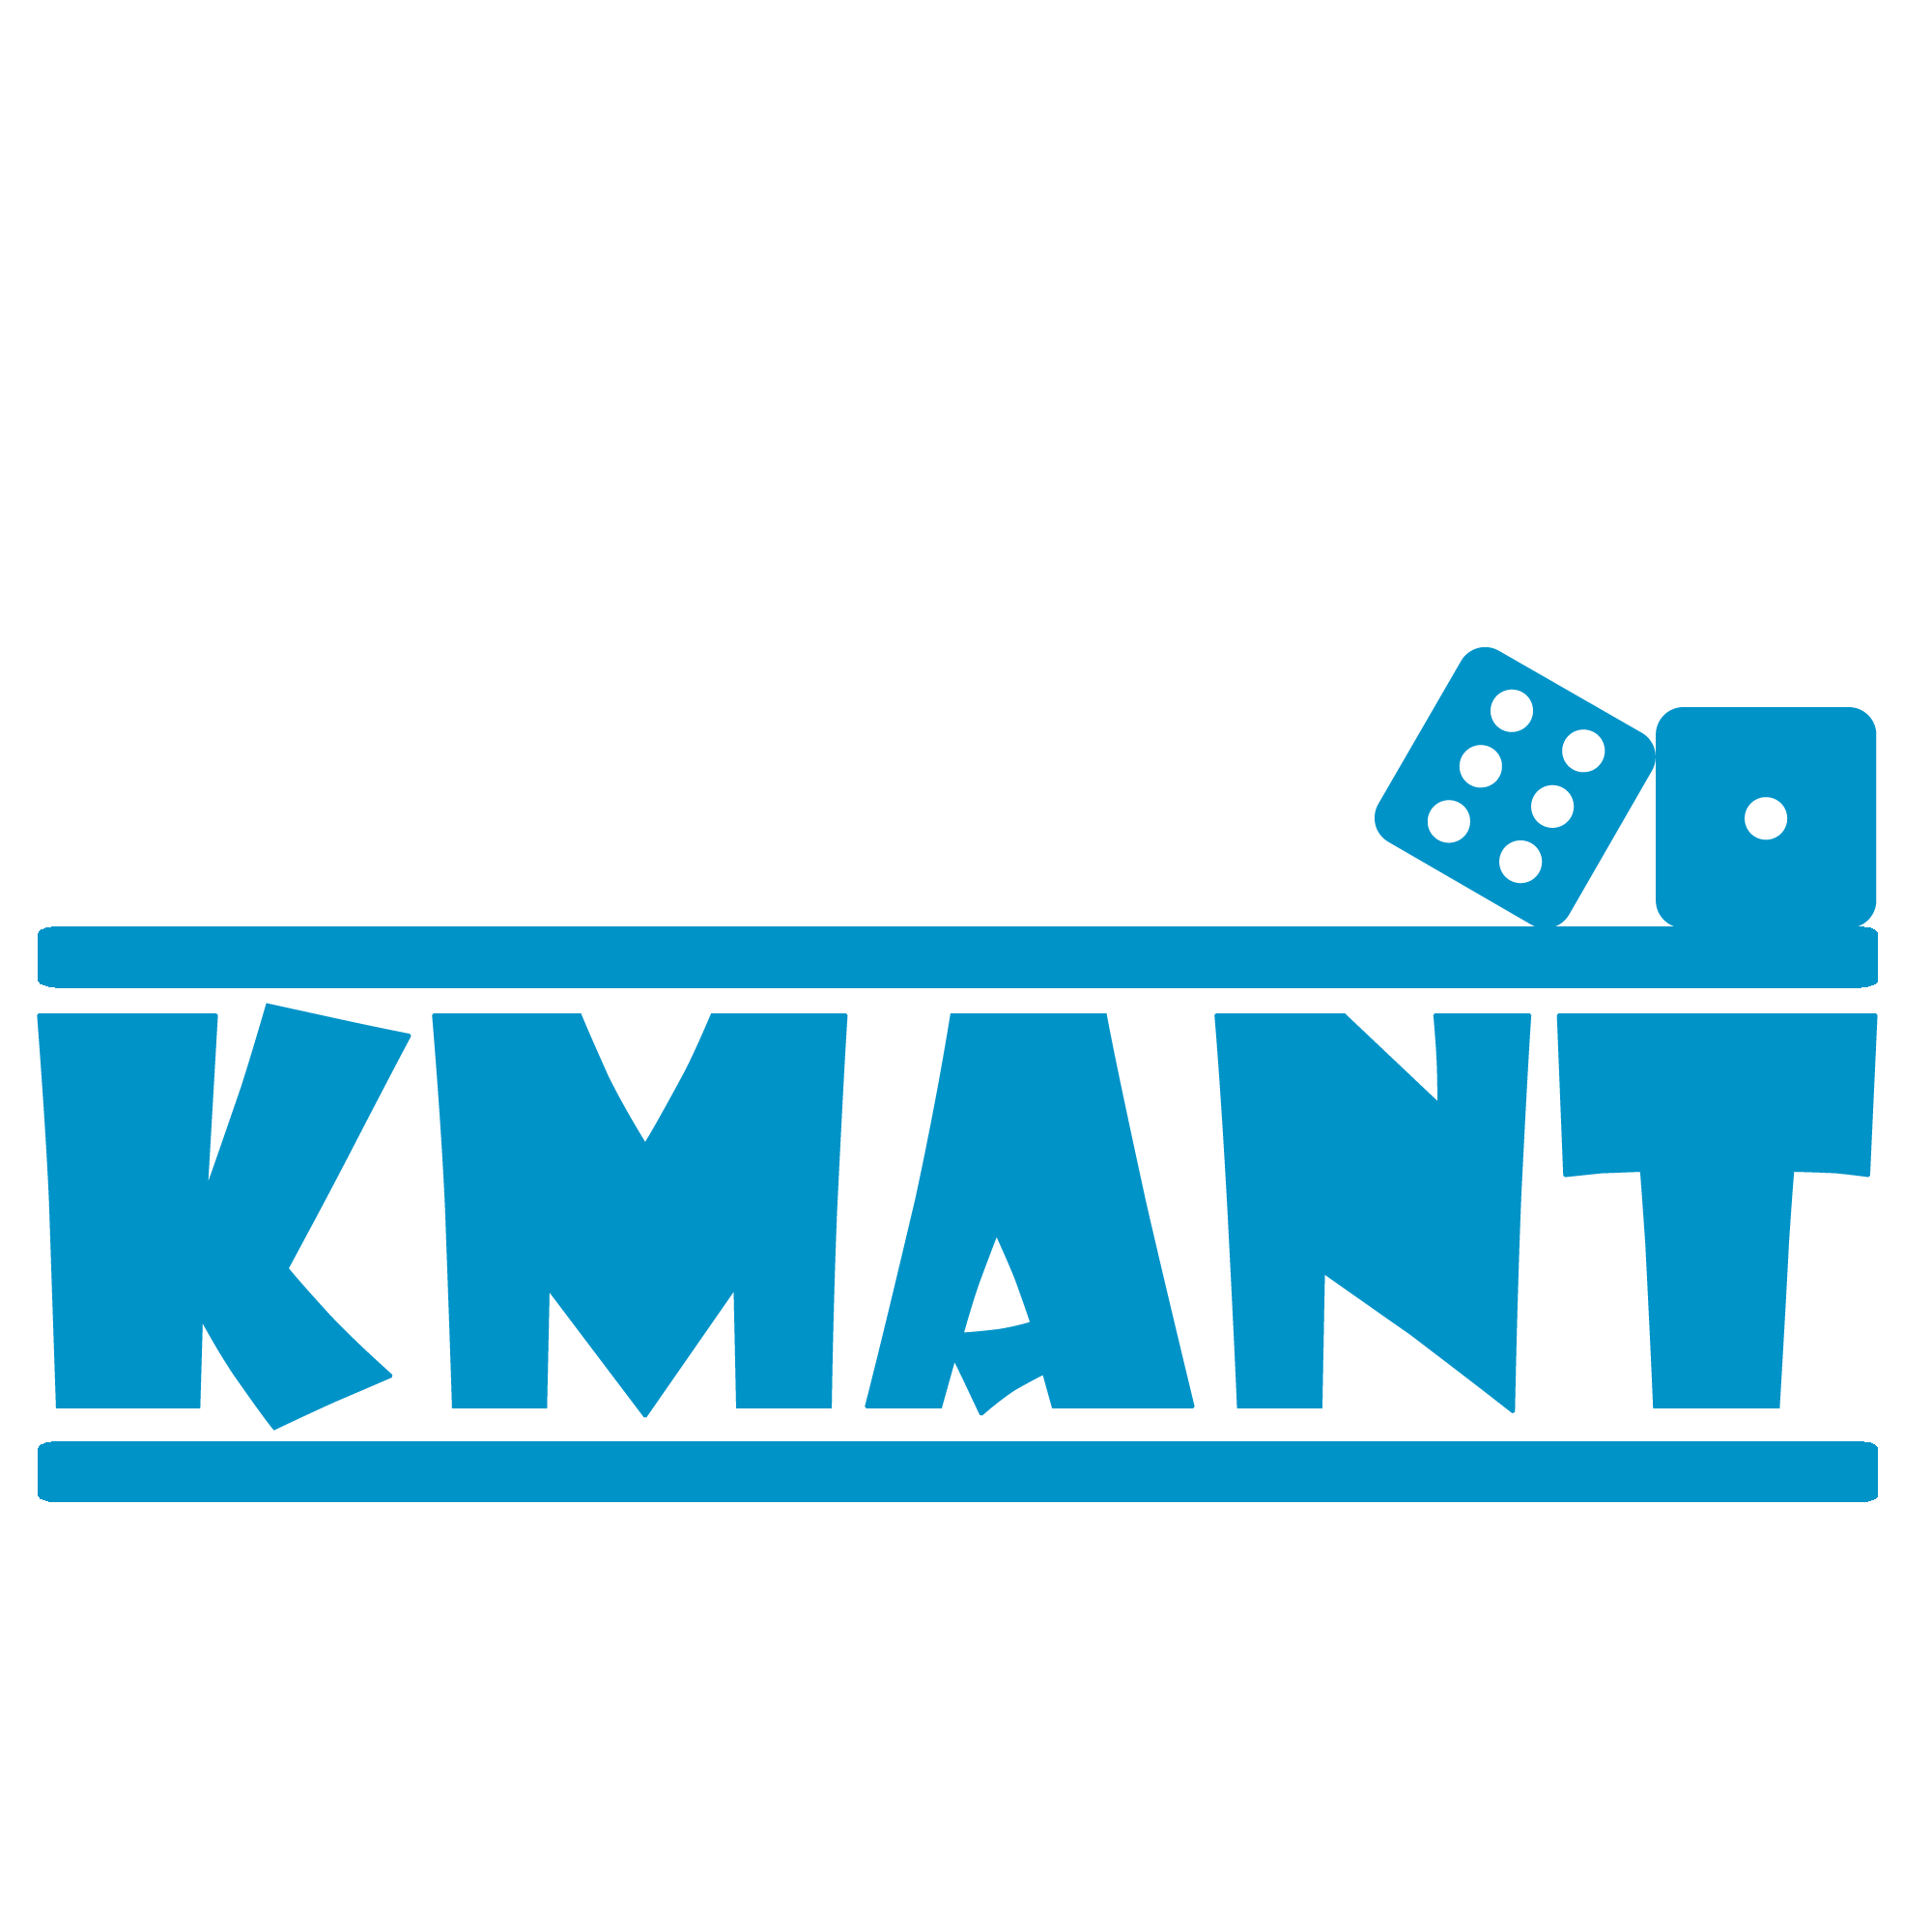 KMANT - Killing Monsters And Nicking Treasure is a UK based gaming website, bringing you news, reviews and general stuff for boardgames, RPG's & wargames.